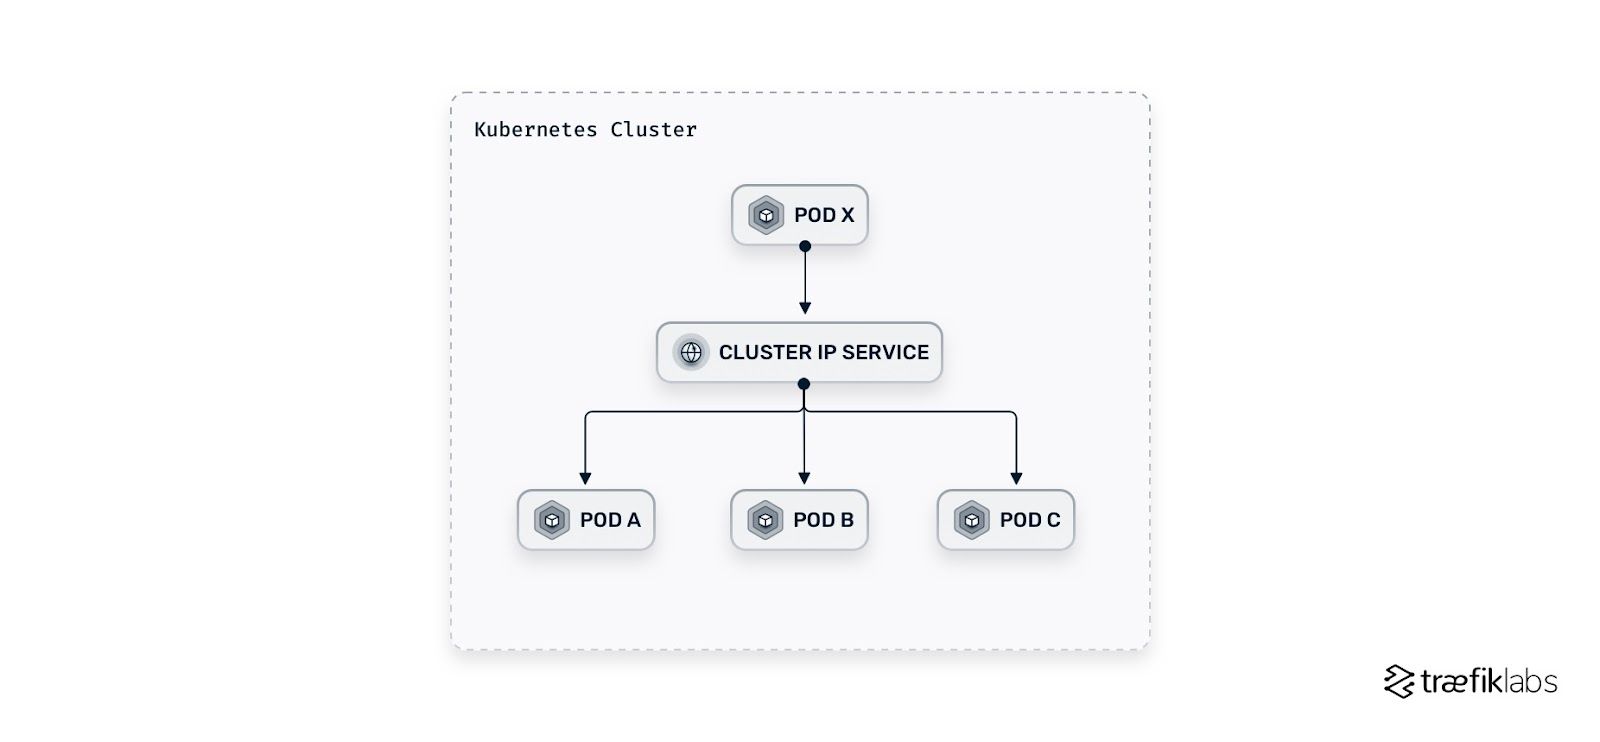 clusterip service is one of the benefits of ingress controller 